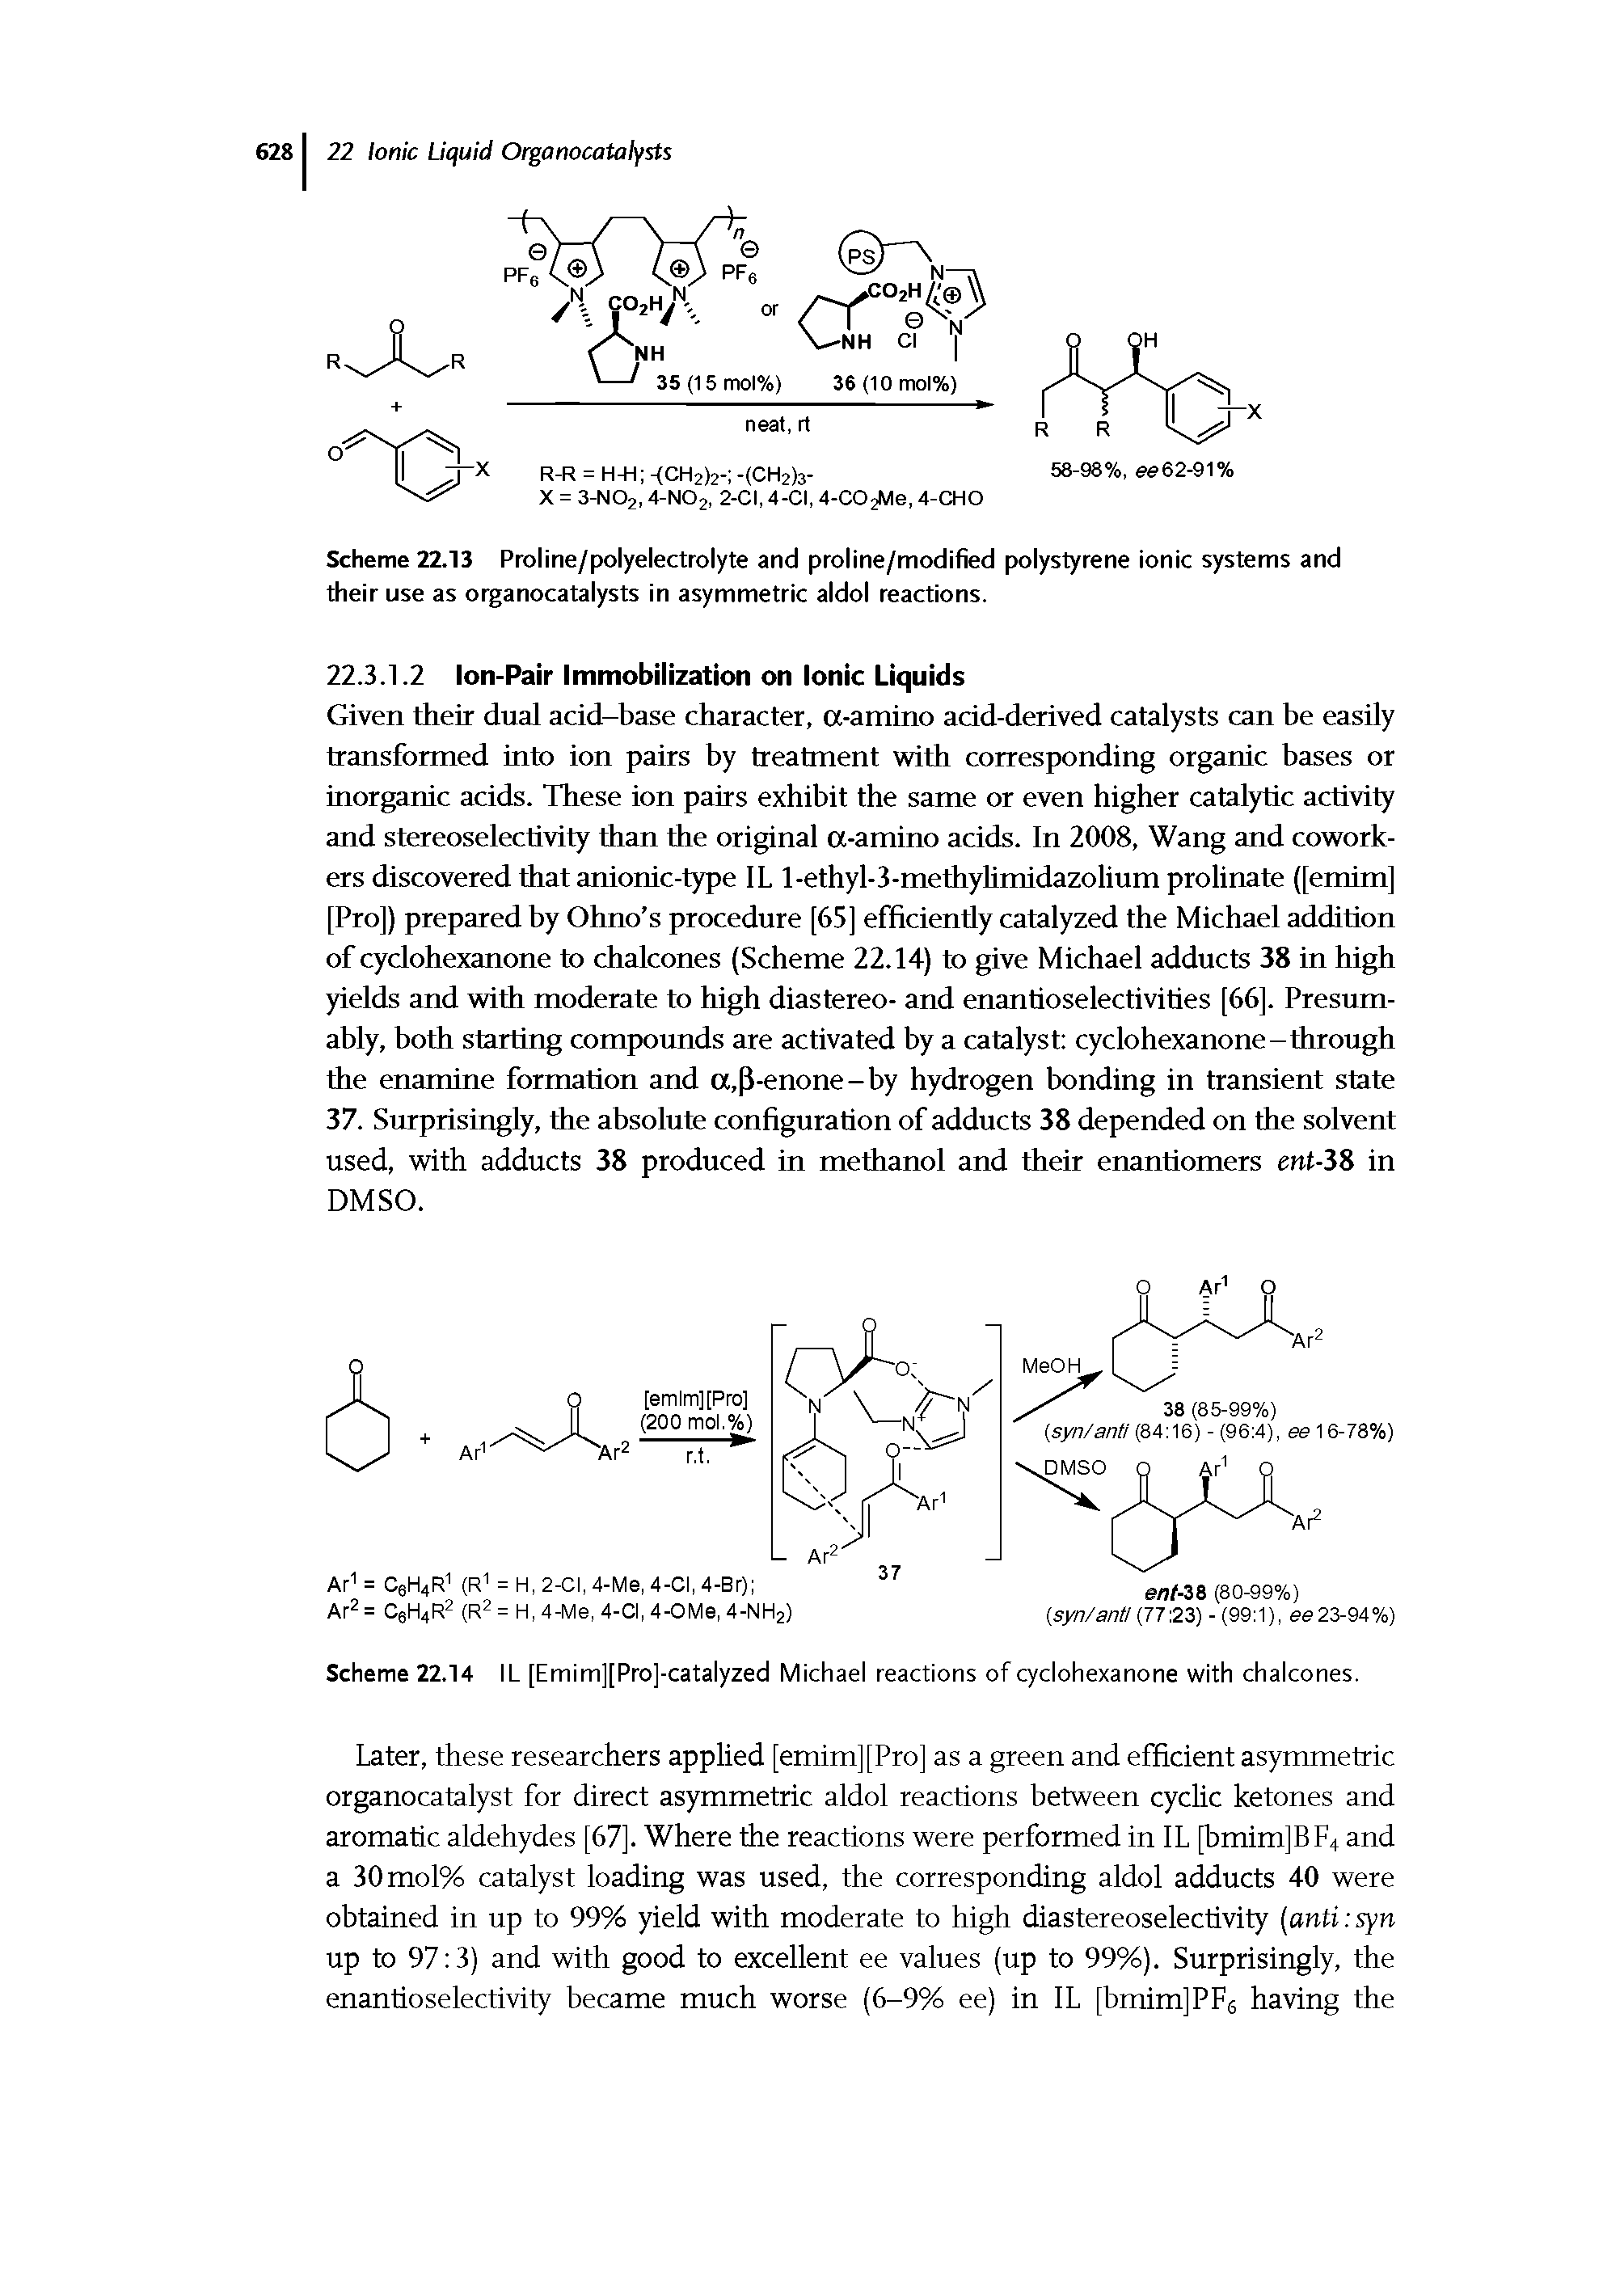 Scheme 22.13 Proline/polyelectrolyte and proline/modified polystyrene ionic systems and their use as organocatalysts in asymmetric aldol reactions.